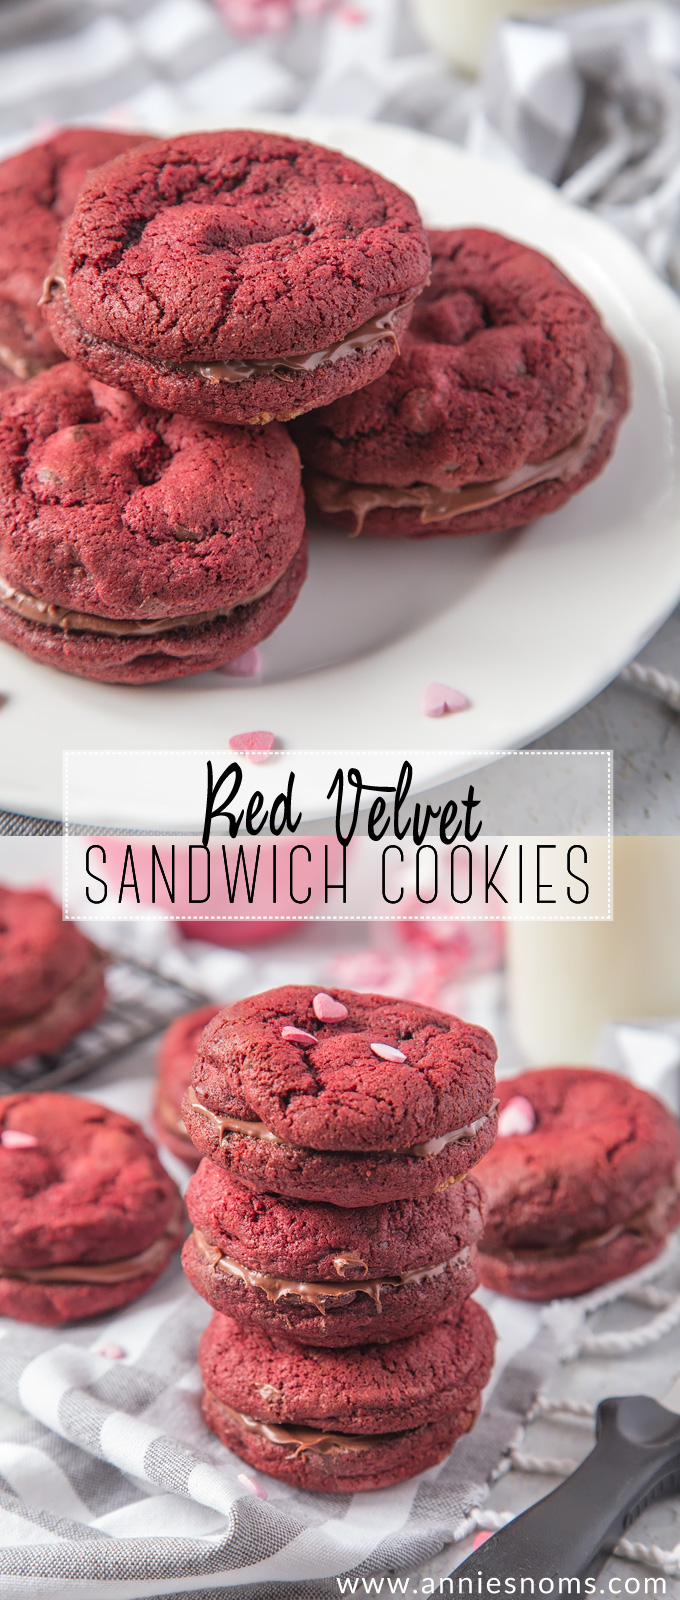 Soft, chewy Chocolate Chip filled Red Velvet Cookies sandwiched together with creamy, smooth chocolate spread to make a cute and delicious Valentine's treat!